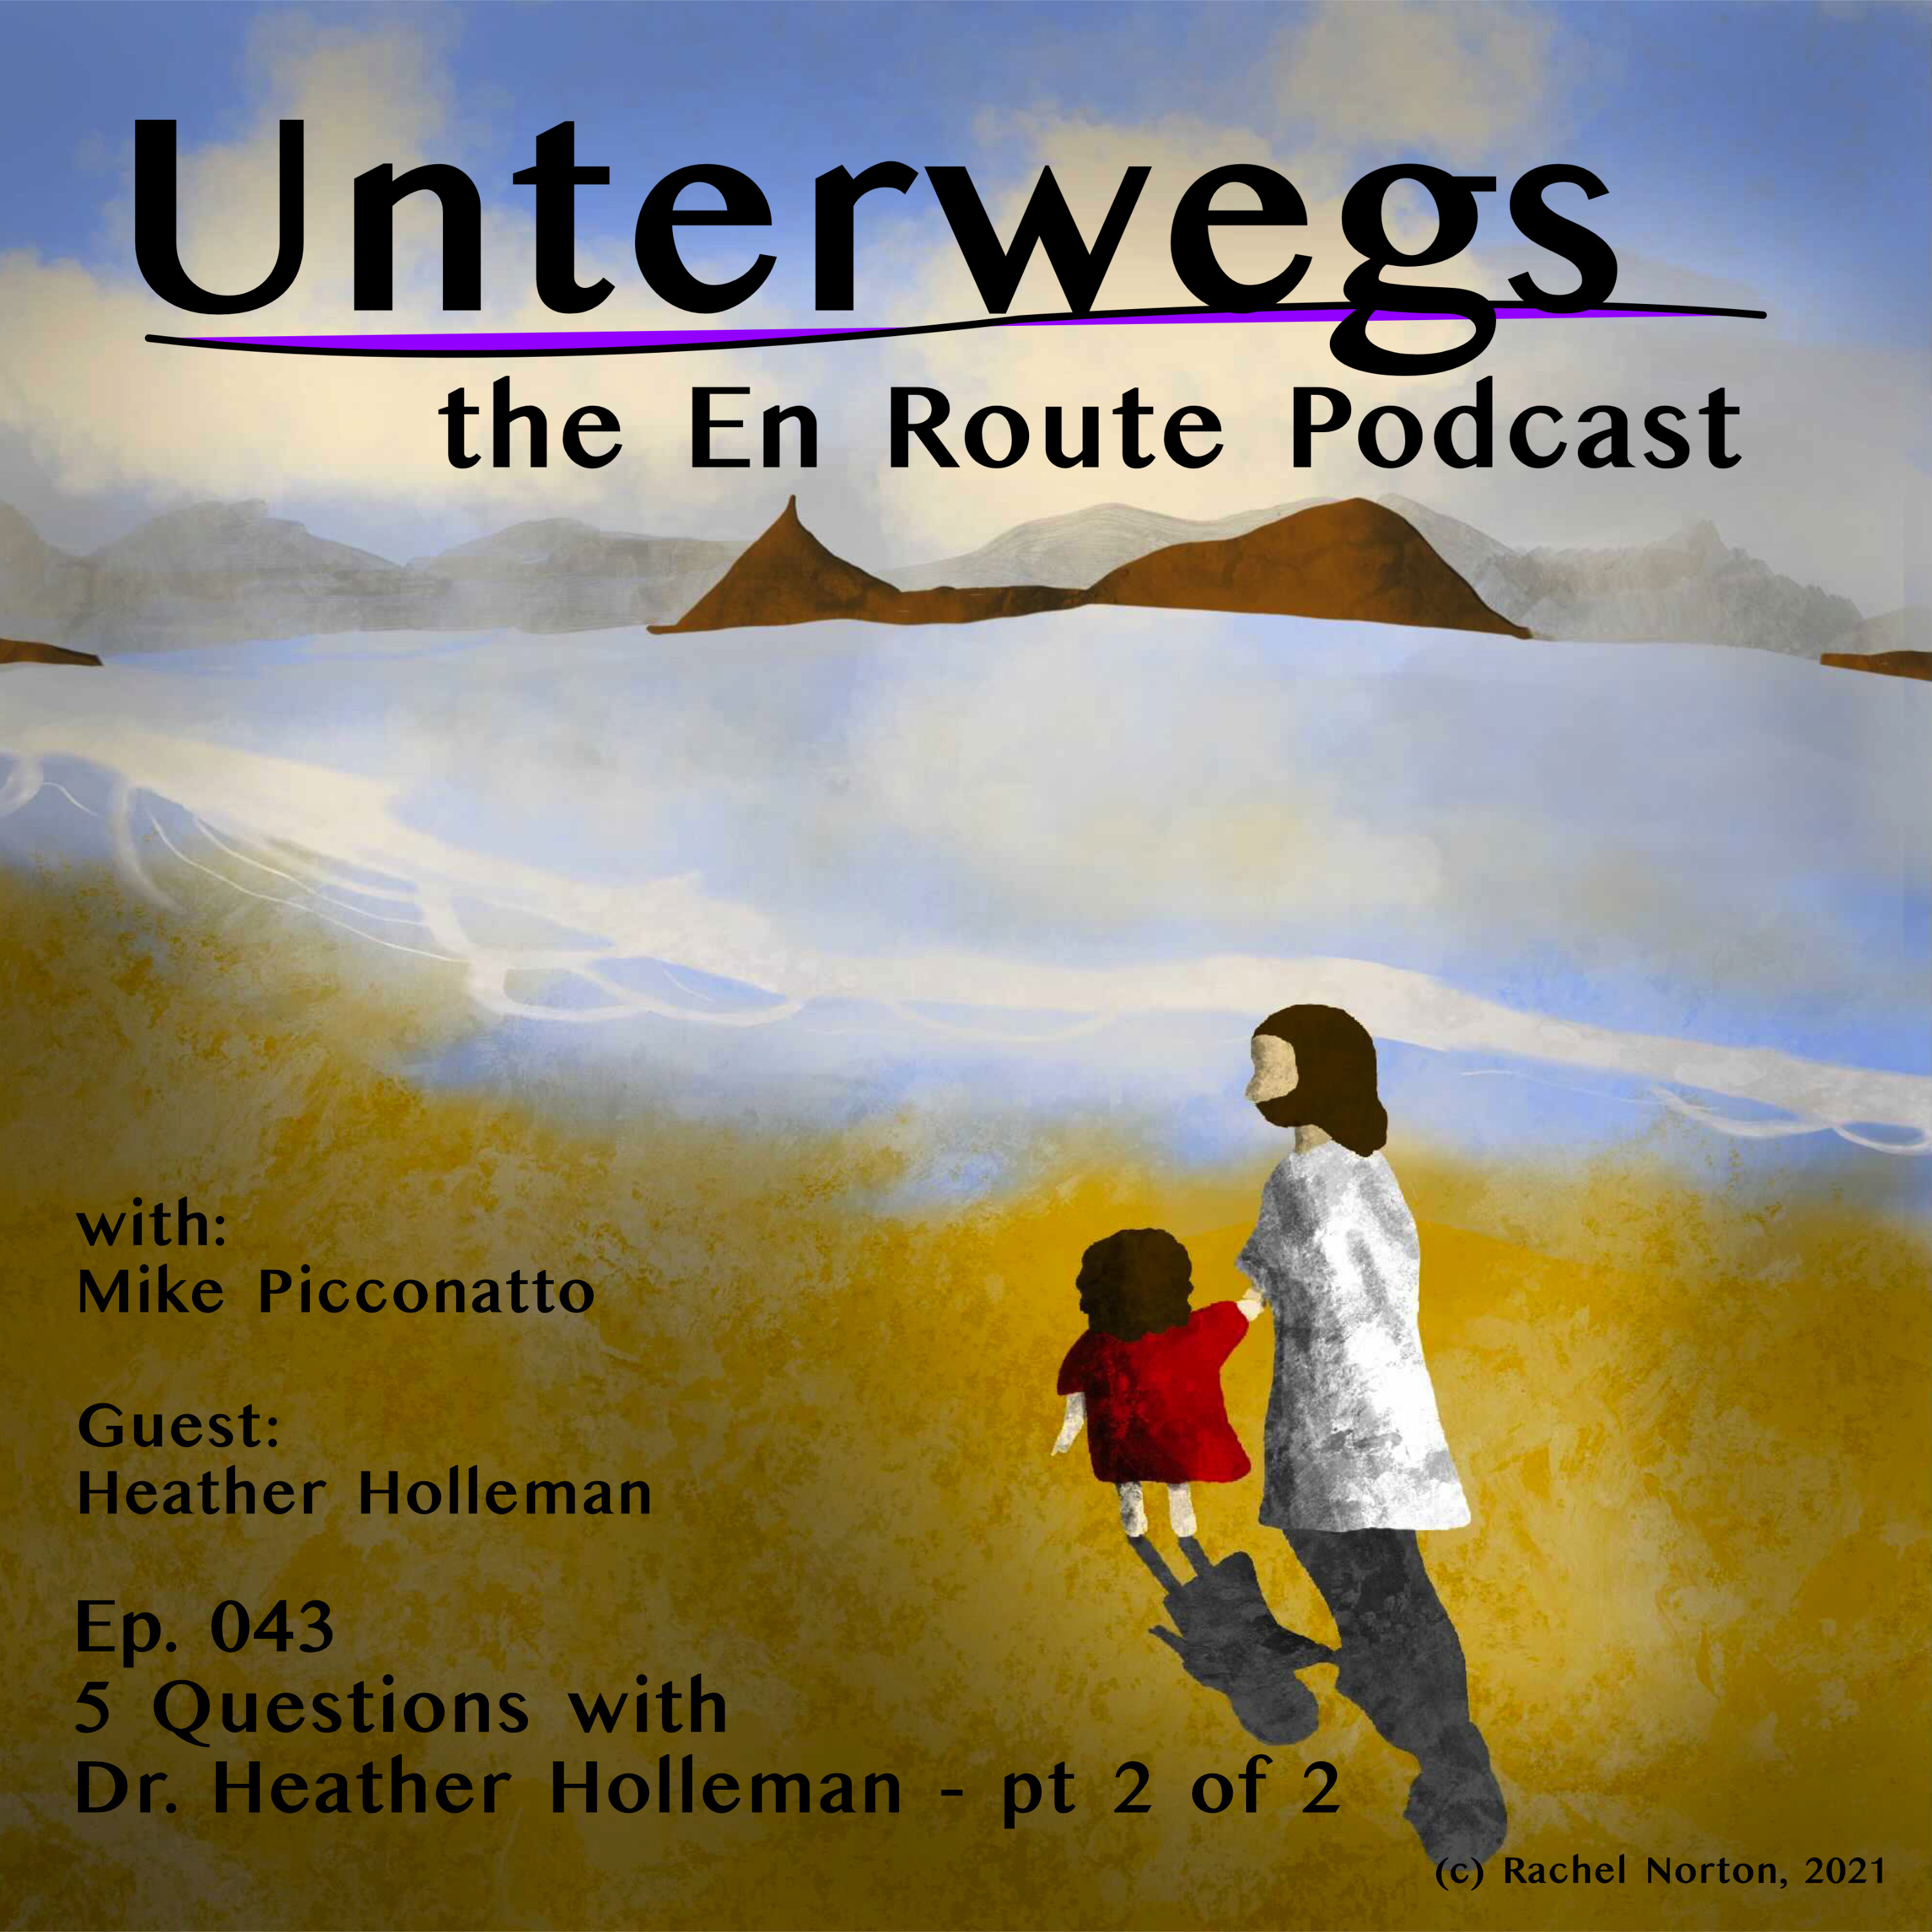 Episode 43 - Five Questions with Dr. Heather Holleman - Part 2 of 2